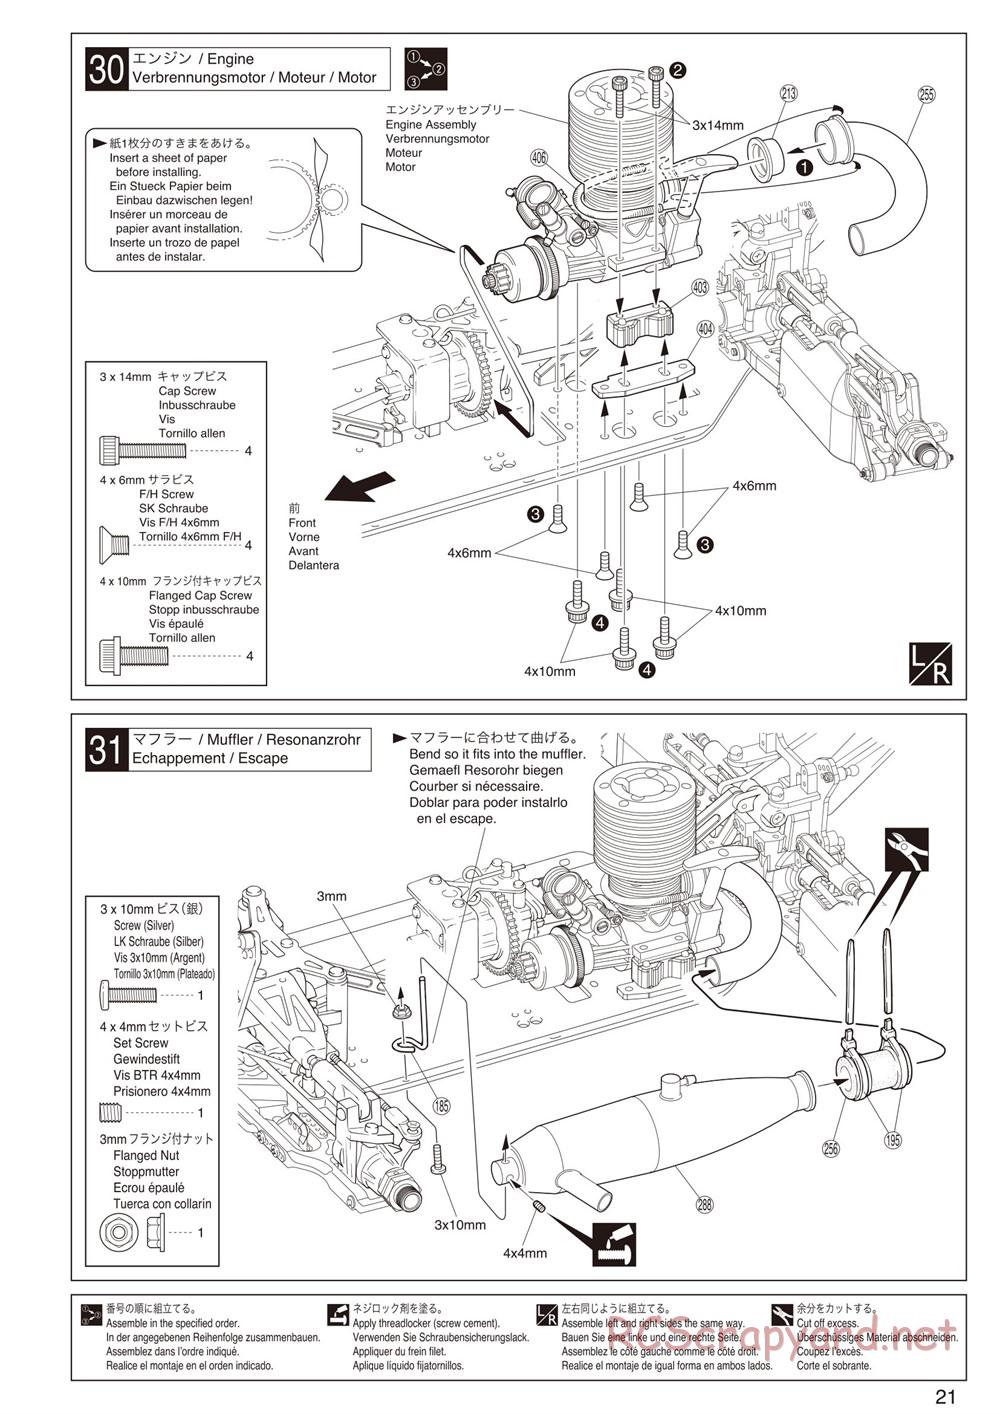 Kyosho - Inferno Neo ST - Manual - Page 21